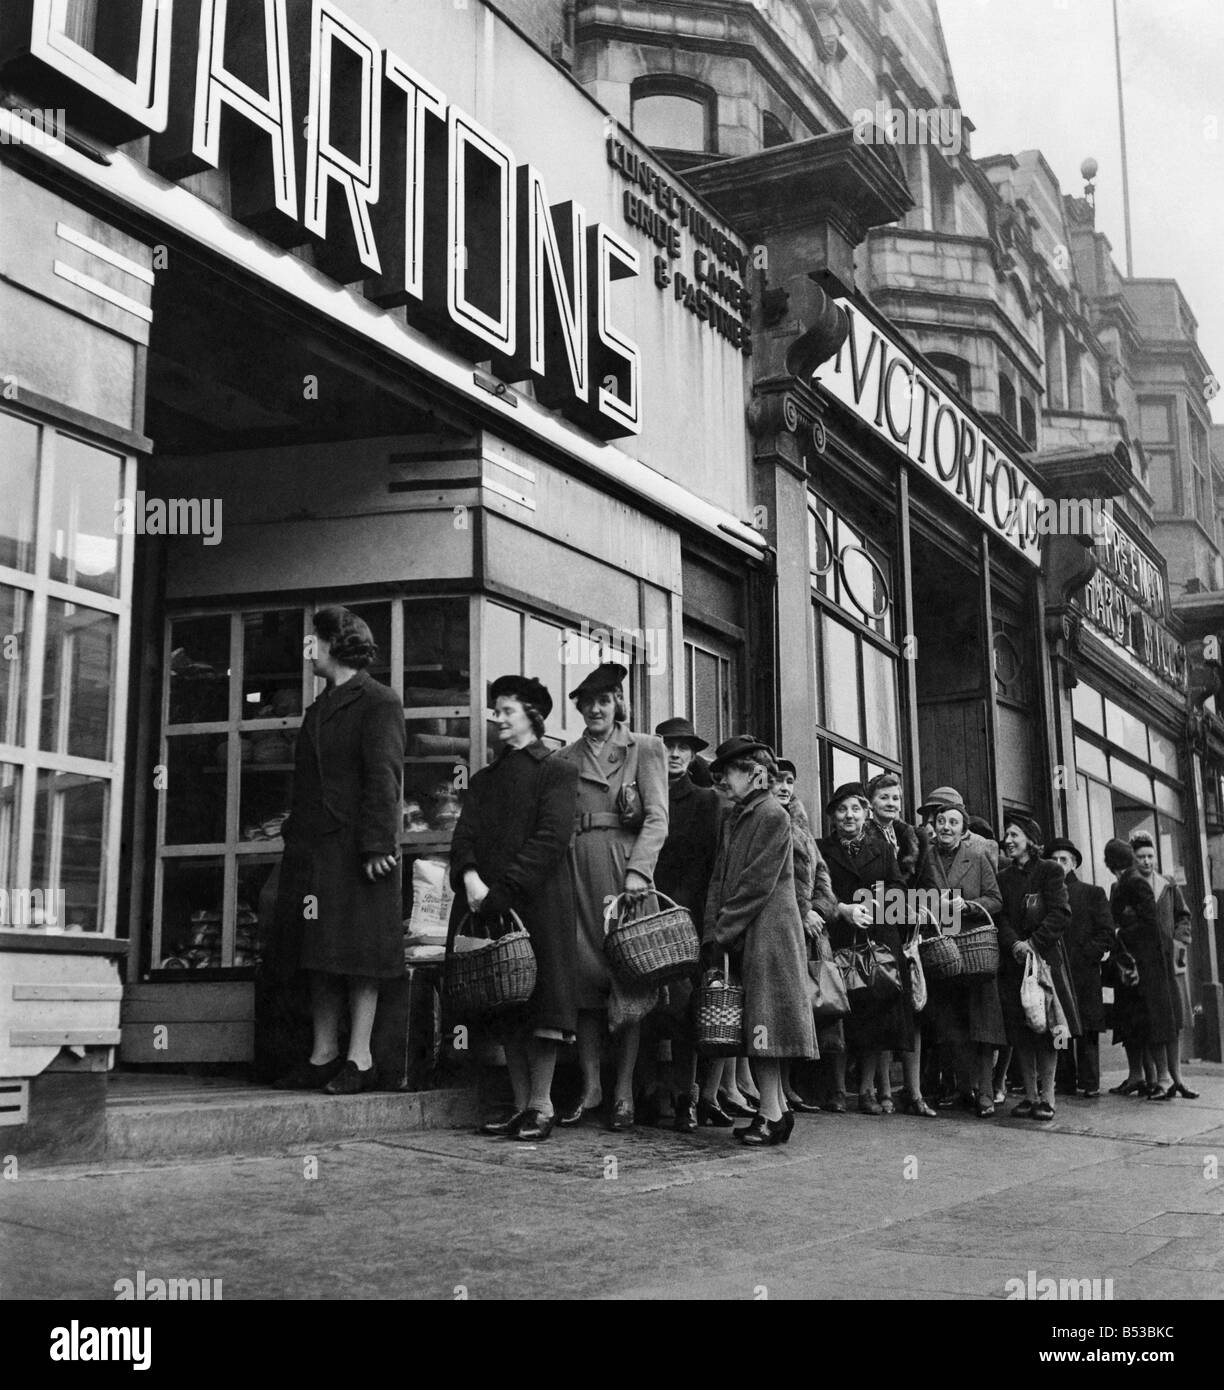 A queue is born. A million British housewives queue up each working day ...